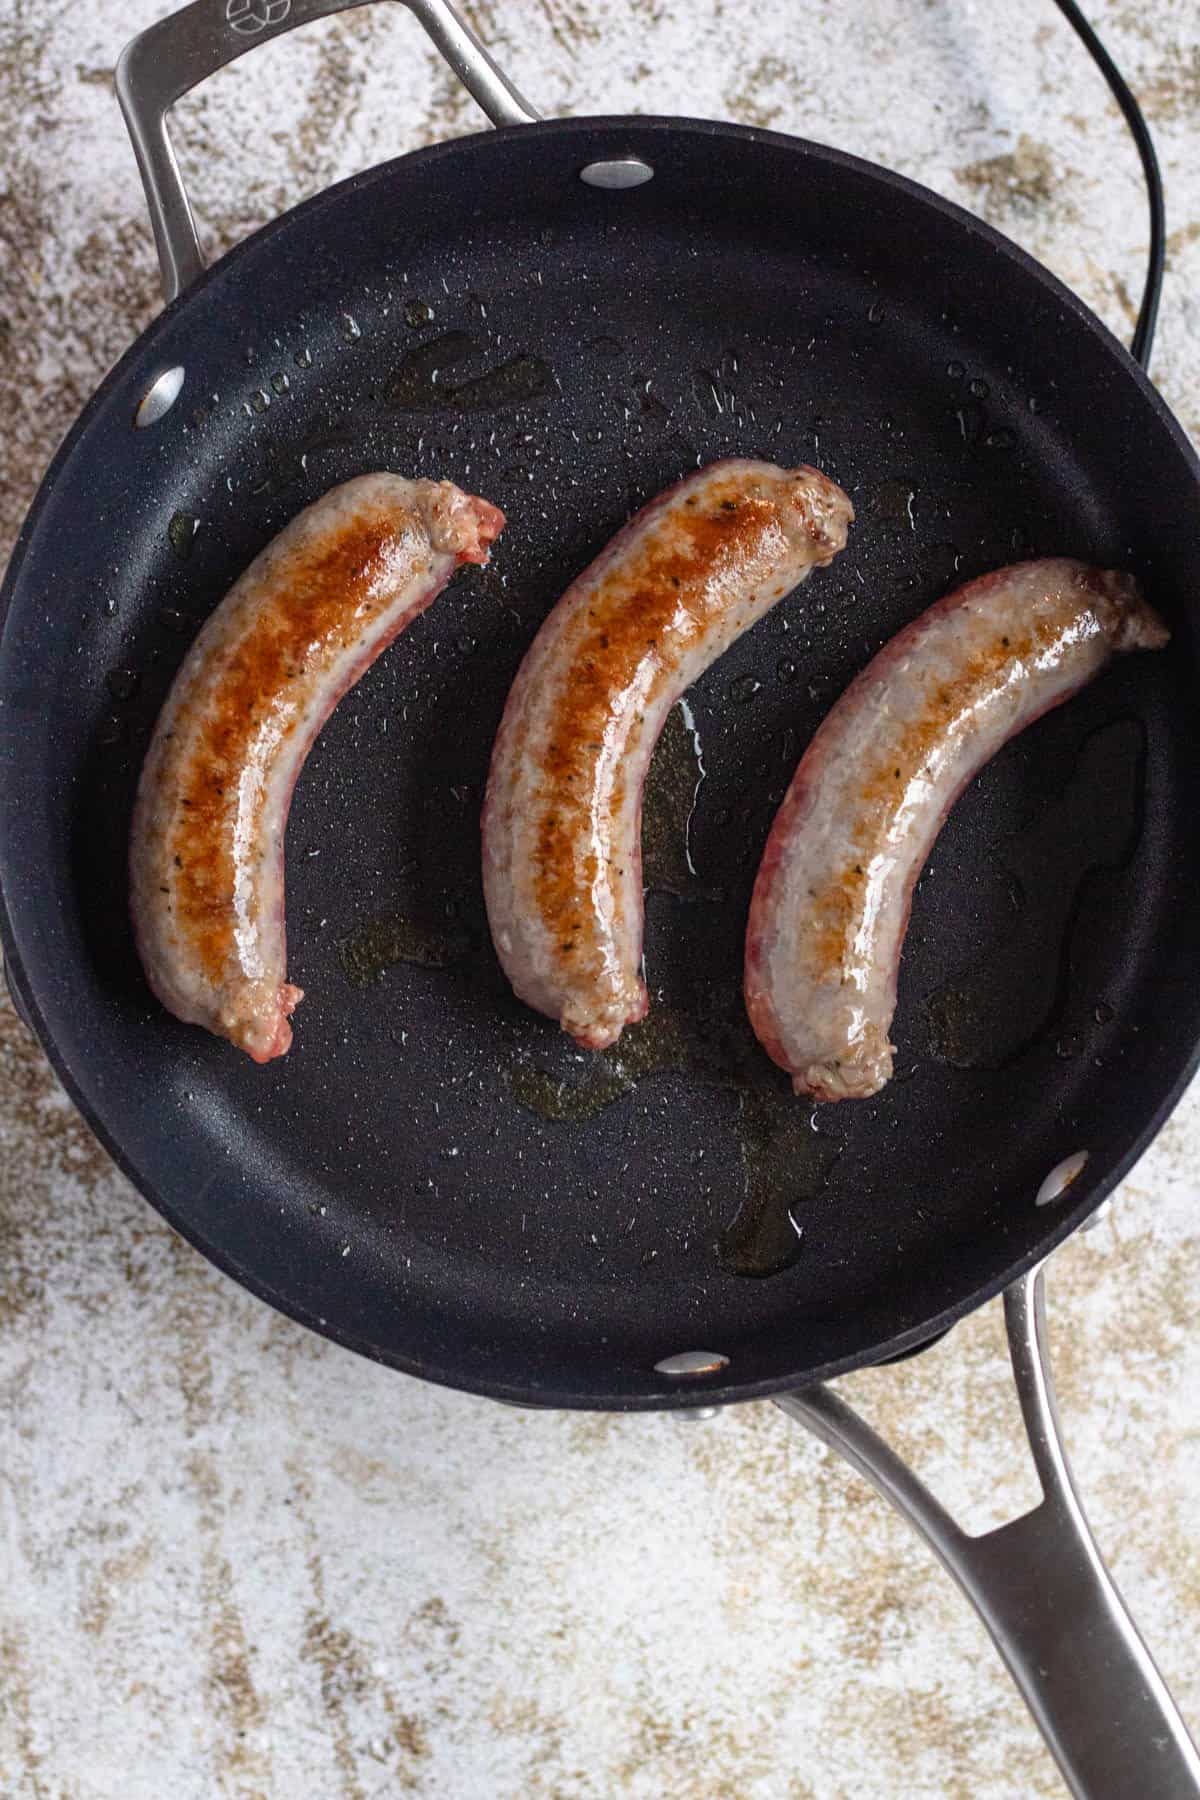 Sausages cooking in a skillet for Italian Sausage and Peppers recipe.